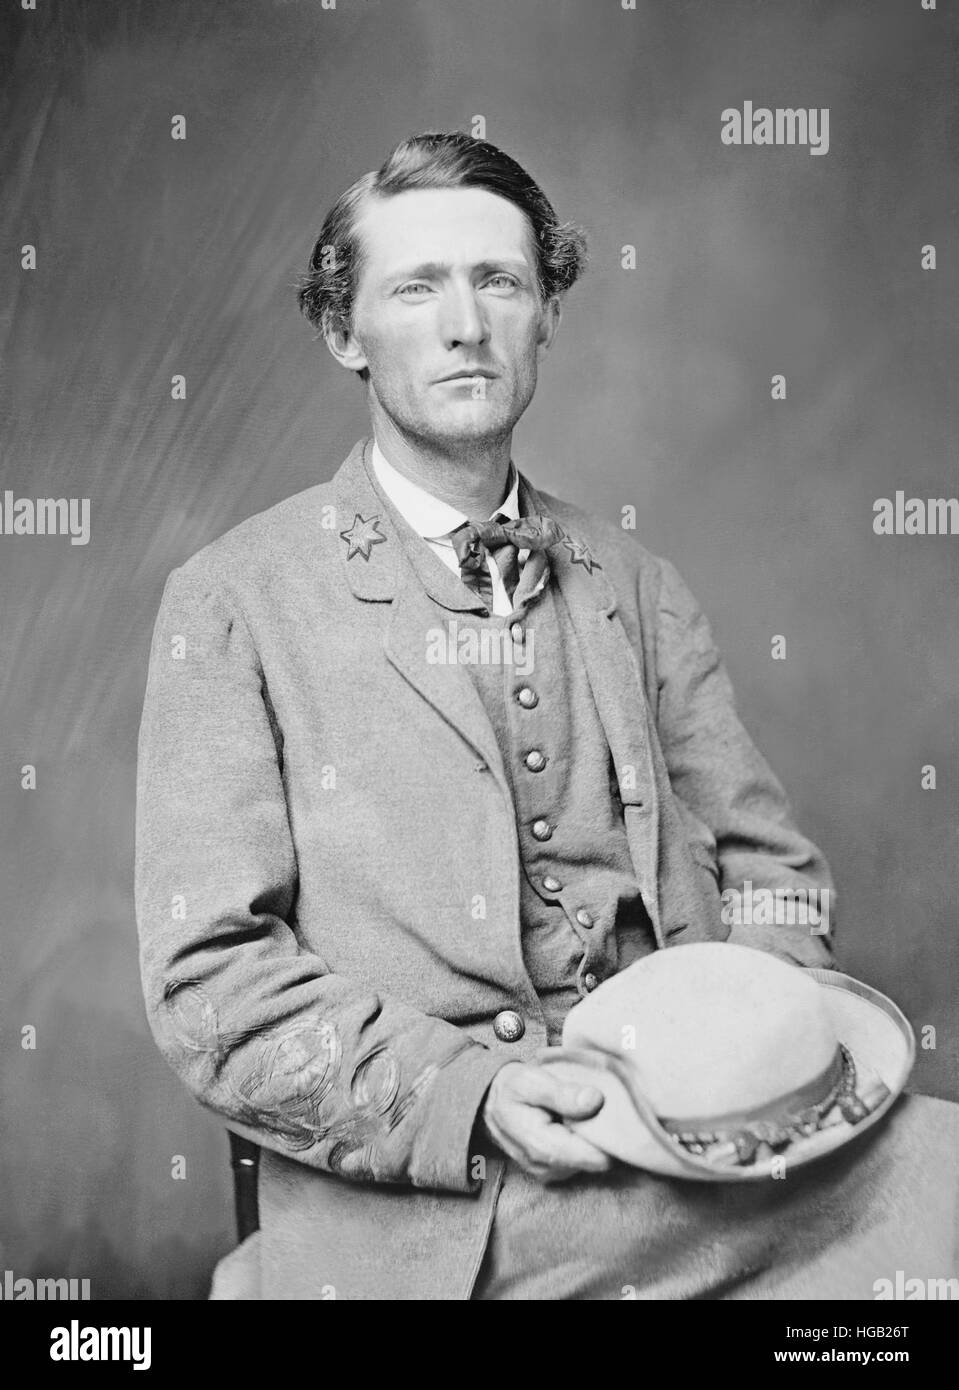 American Civil War Colonel John S. Mosby of the Confederate Army. Stock Photo